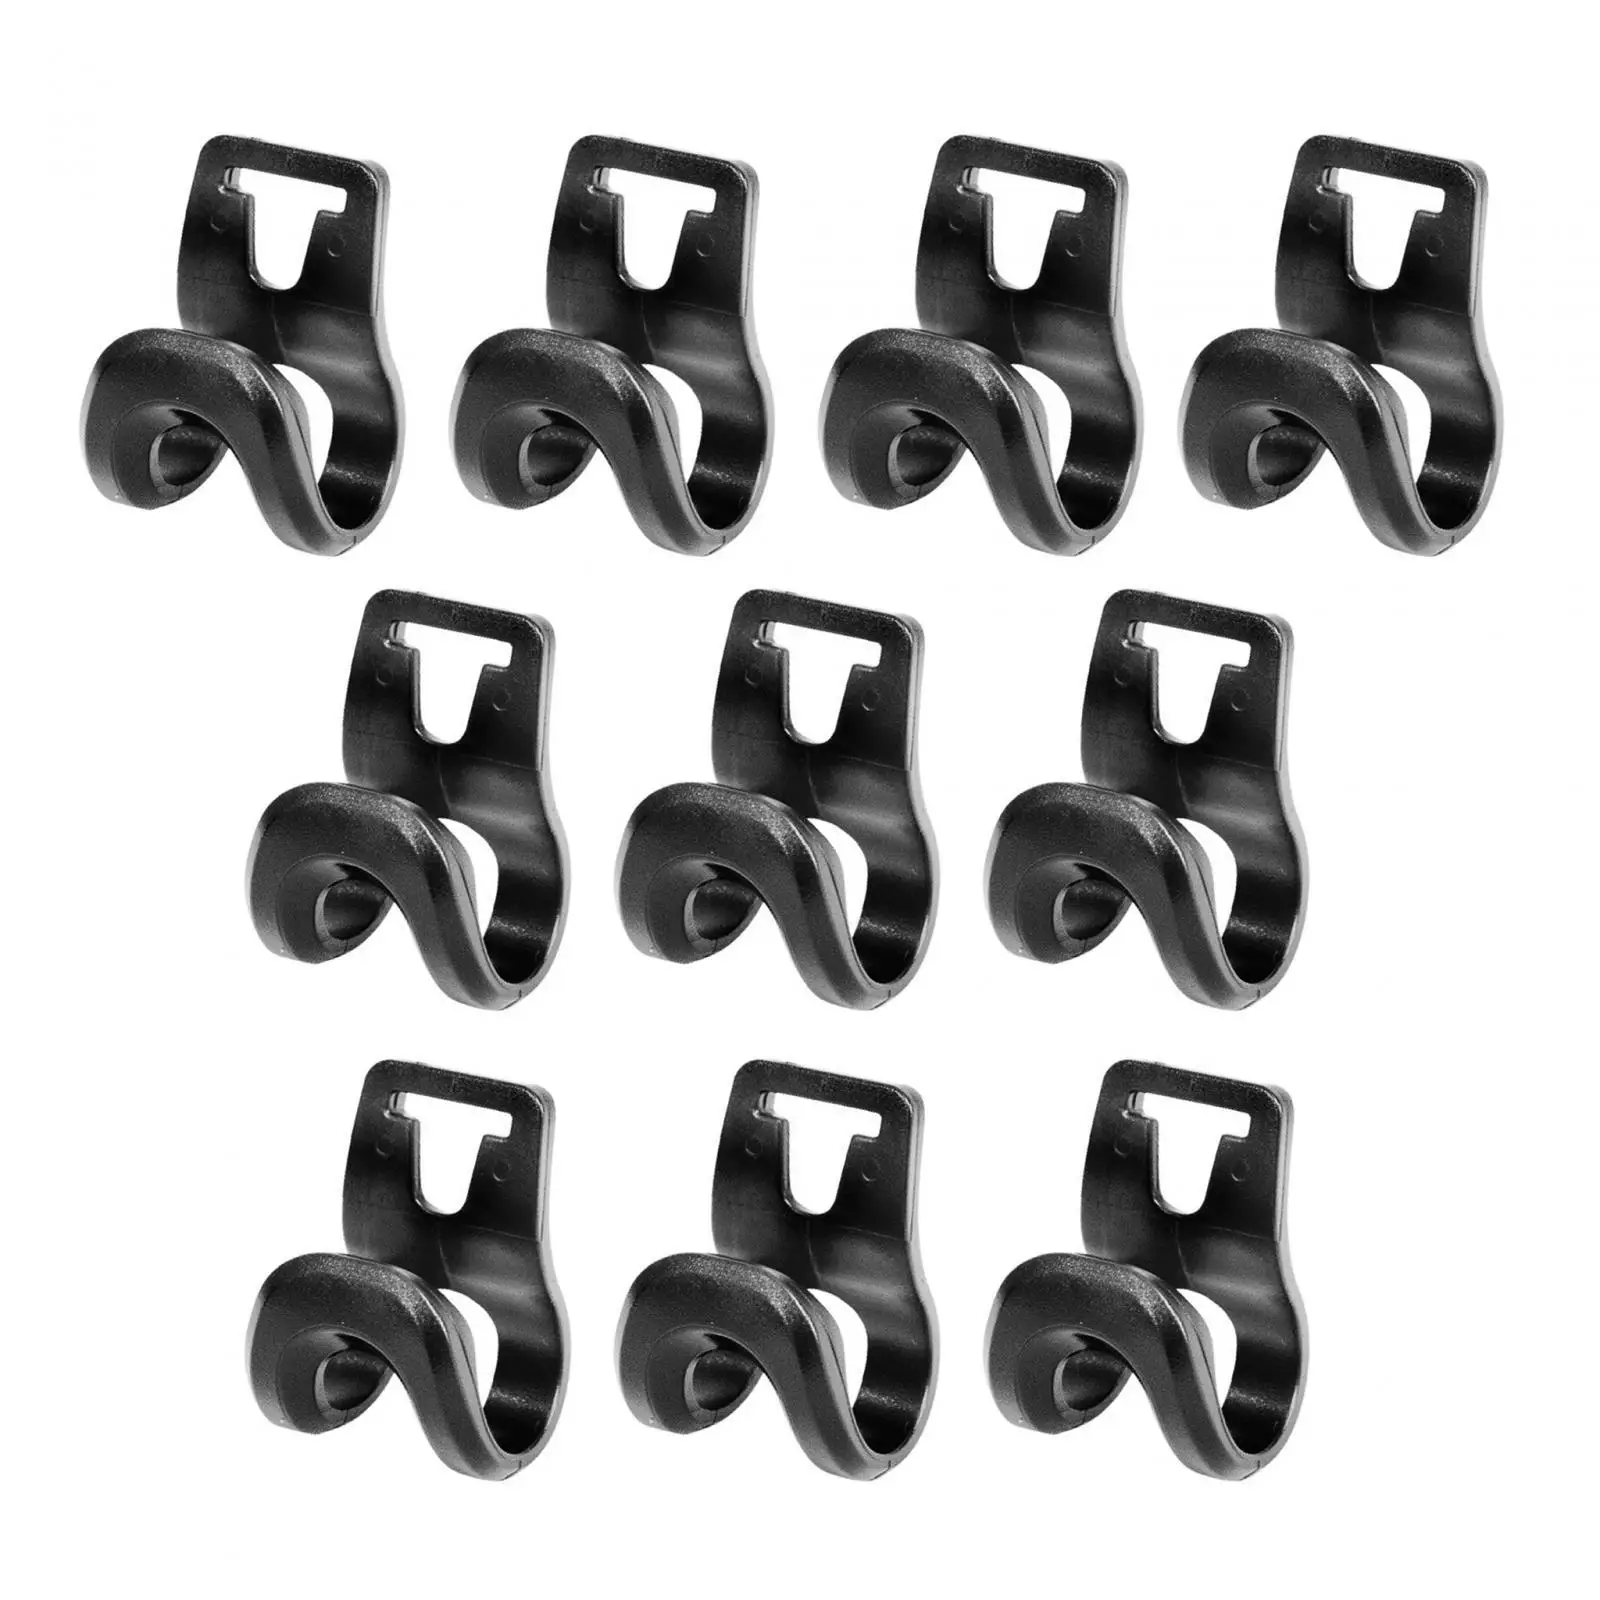 

10x Tent Pole Clips Durable Easy to Install Awning Pole Hanger Clips for Picnic Mat Fixed Hiking Canopy Camping Backpacking